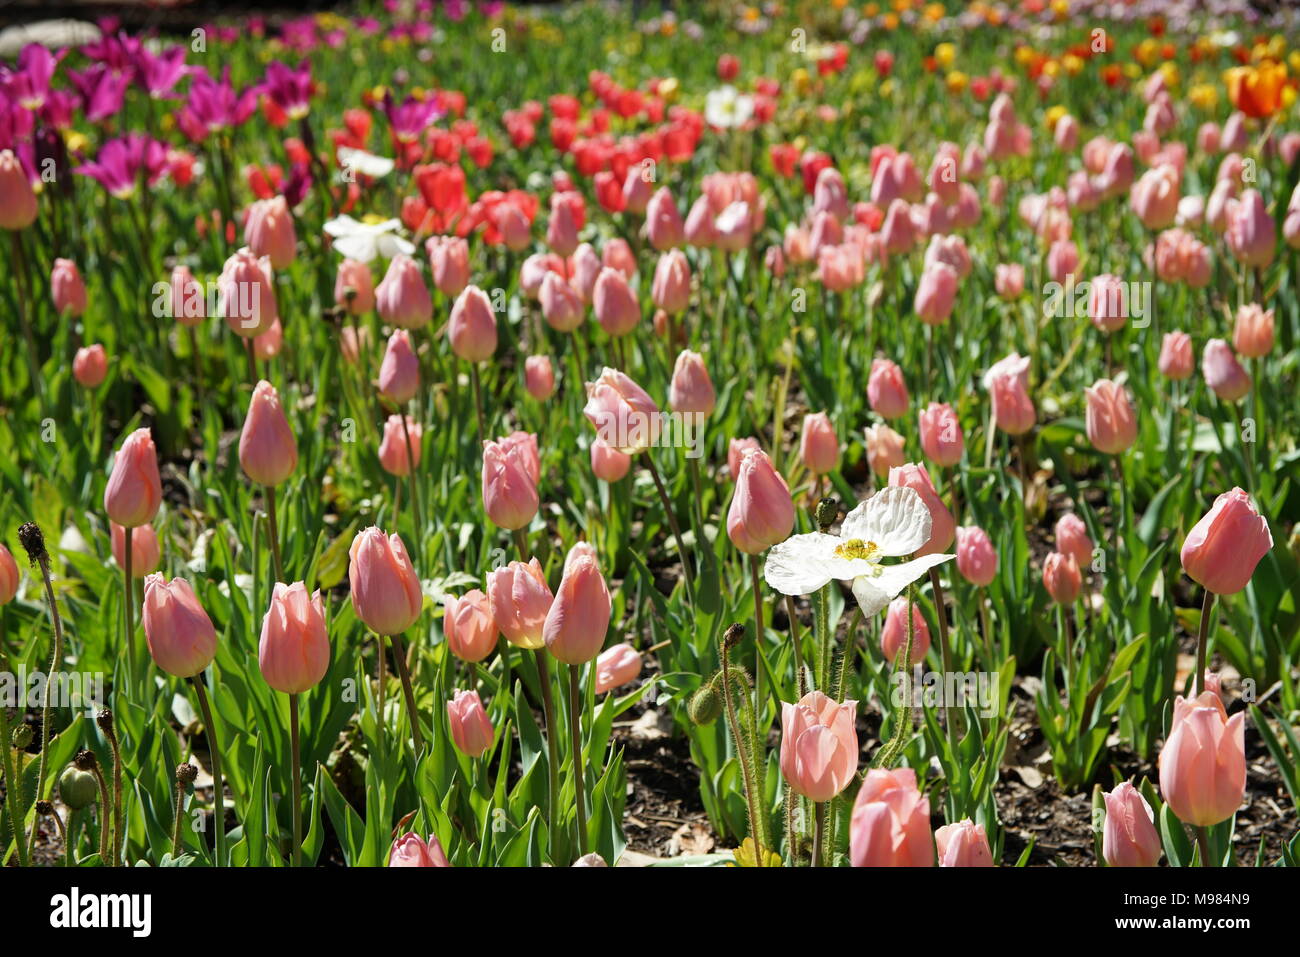 Beautiful and colorful close up shot of Tulip blossom at Descanso Garden Stock Photo